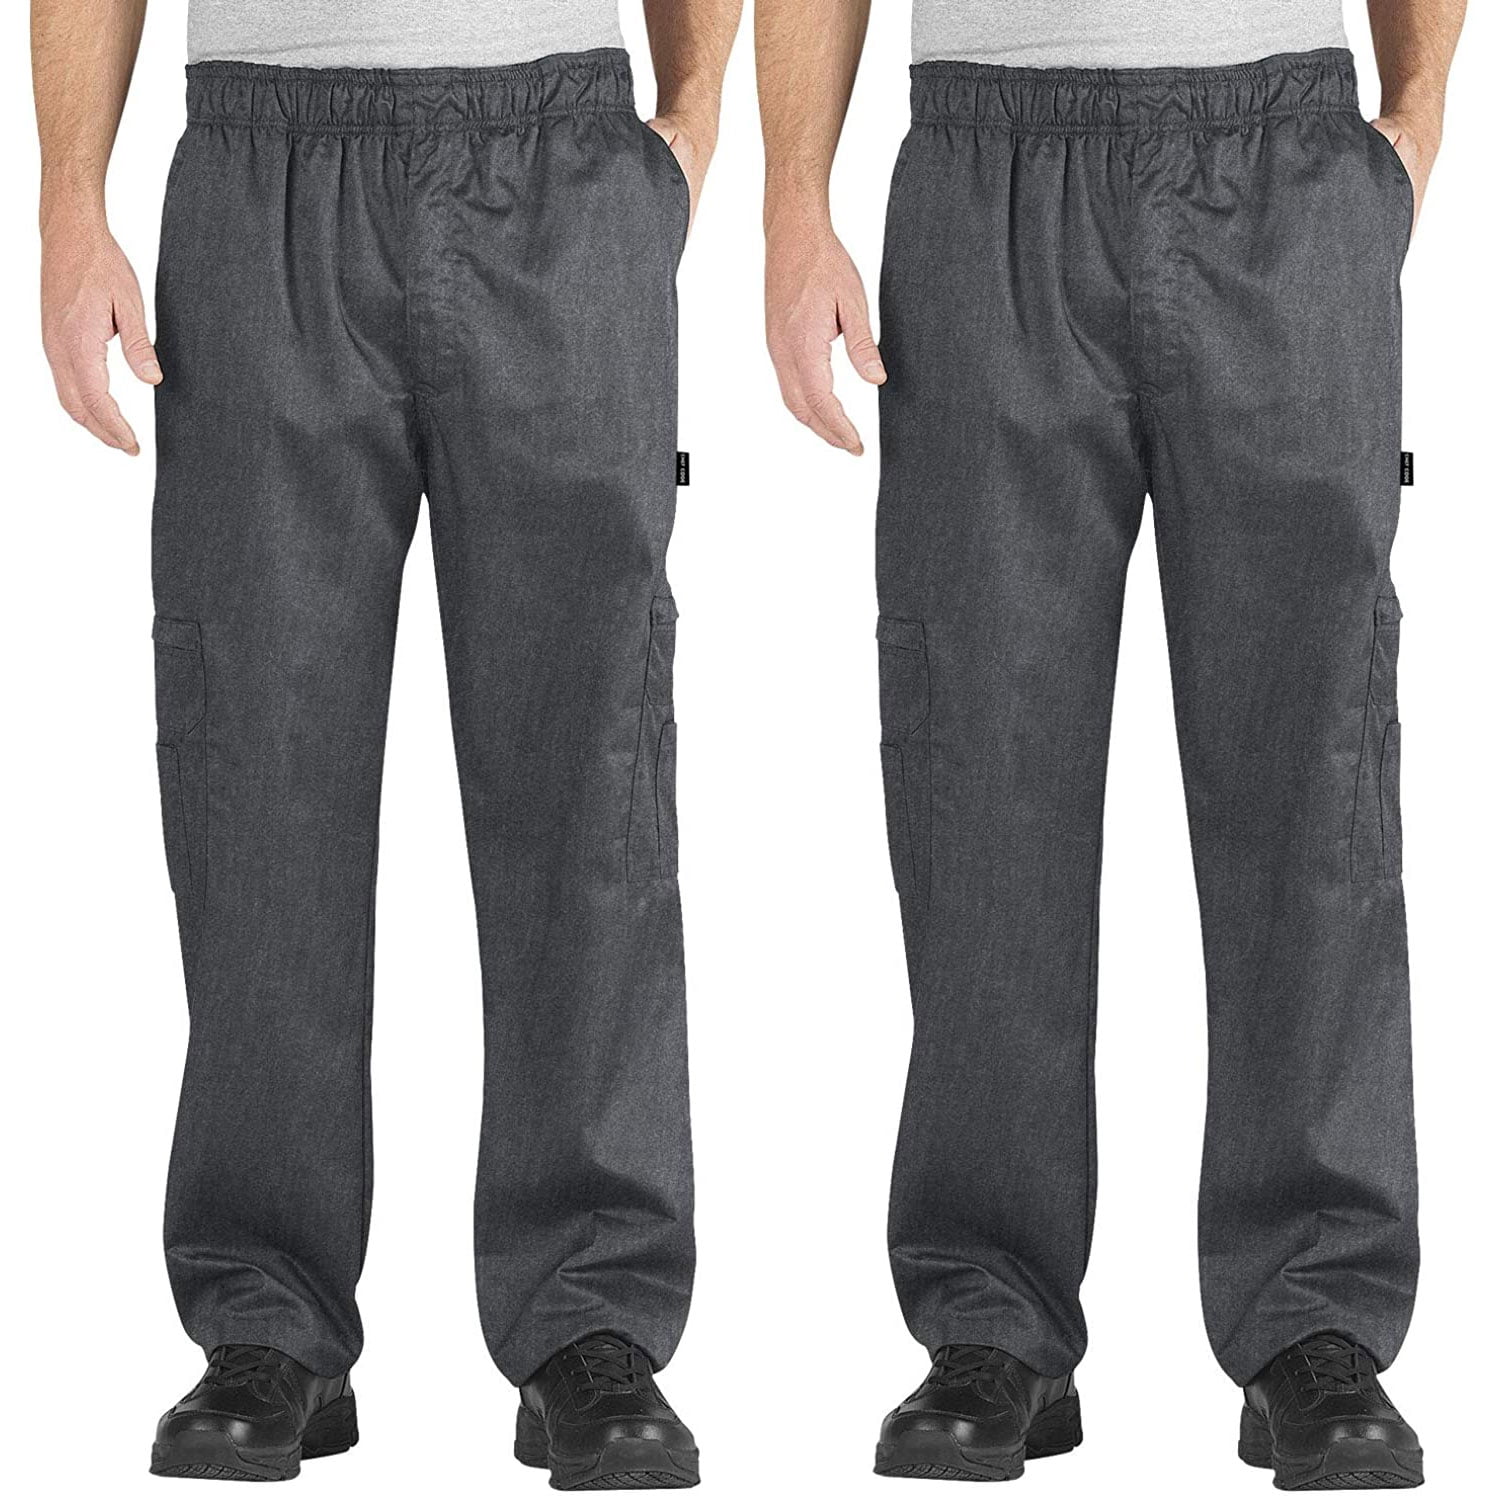 GREAT QUALITY BLACK OR CHECK 3 PK CHEF POLYESTER COTTON DRAWSTRING CHEF PANTS 